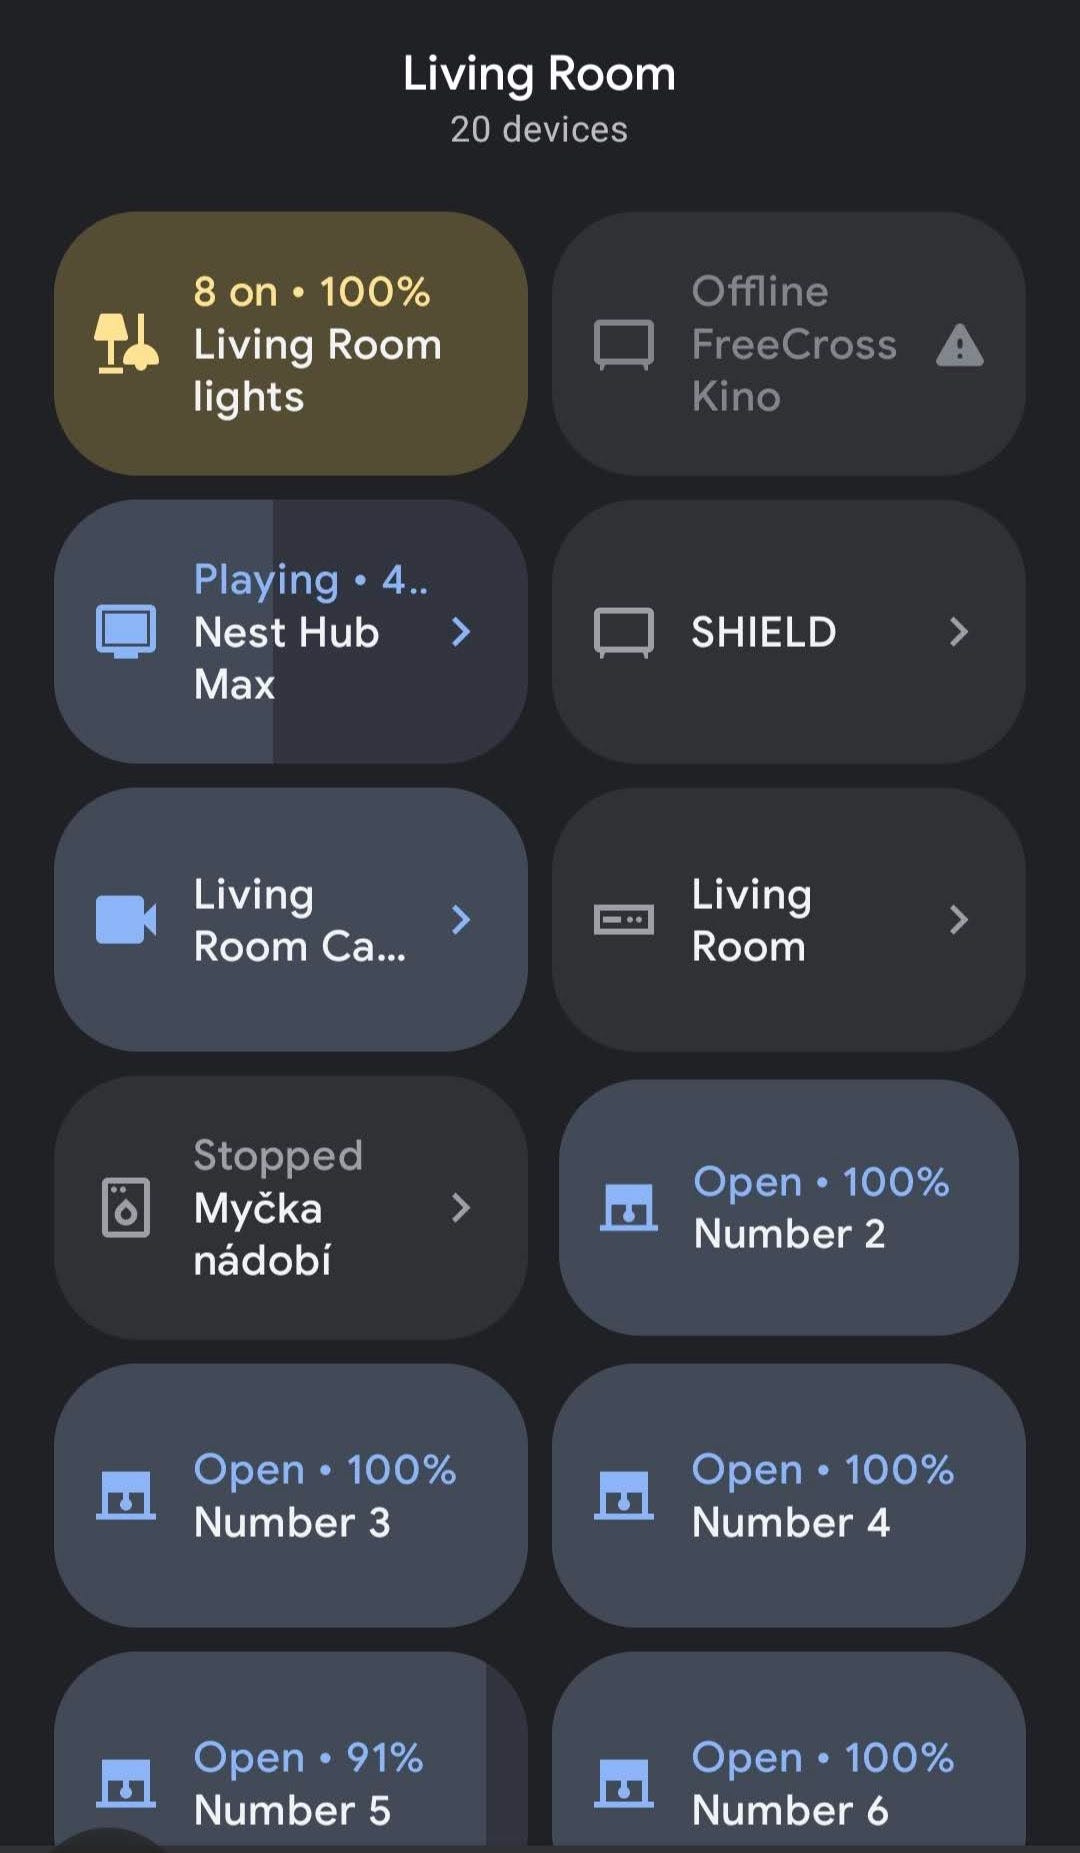 Set up Home Assistant to manage your open source smart home